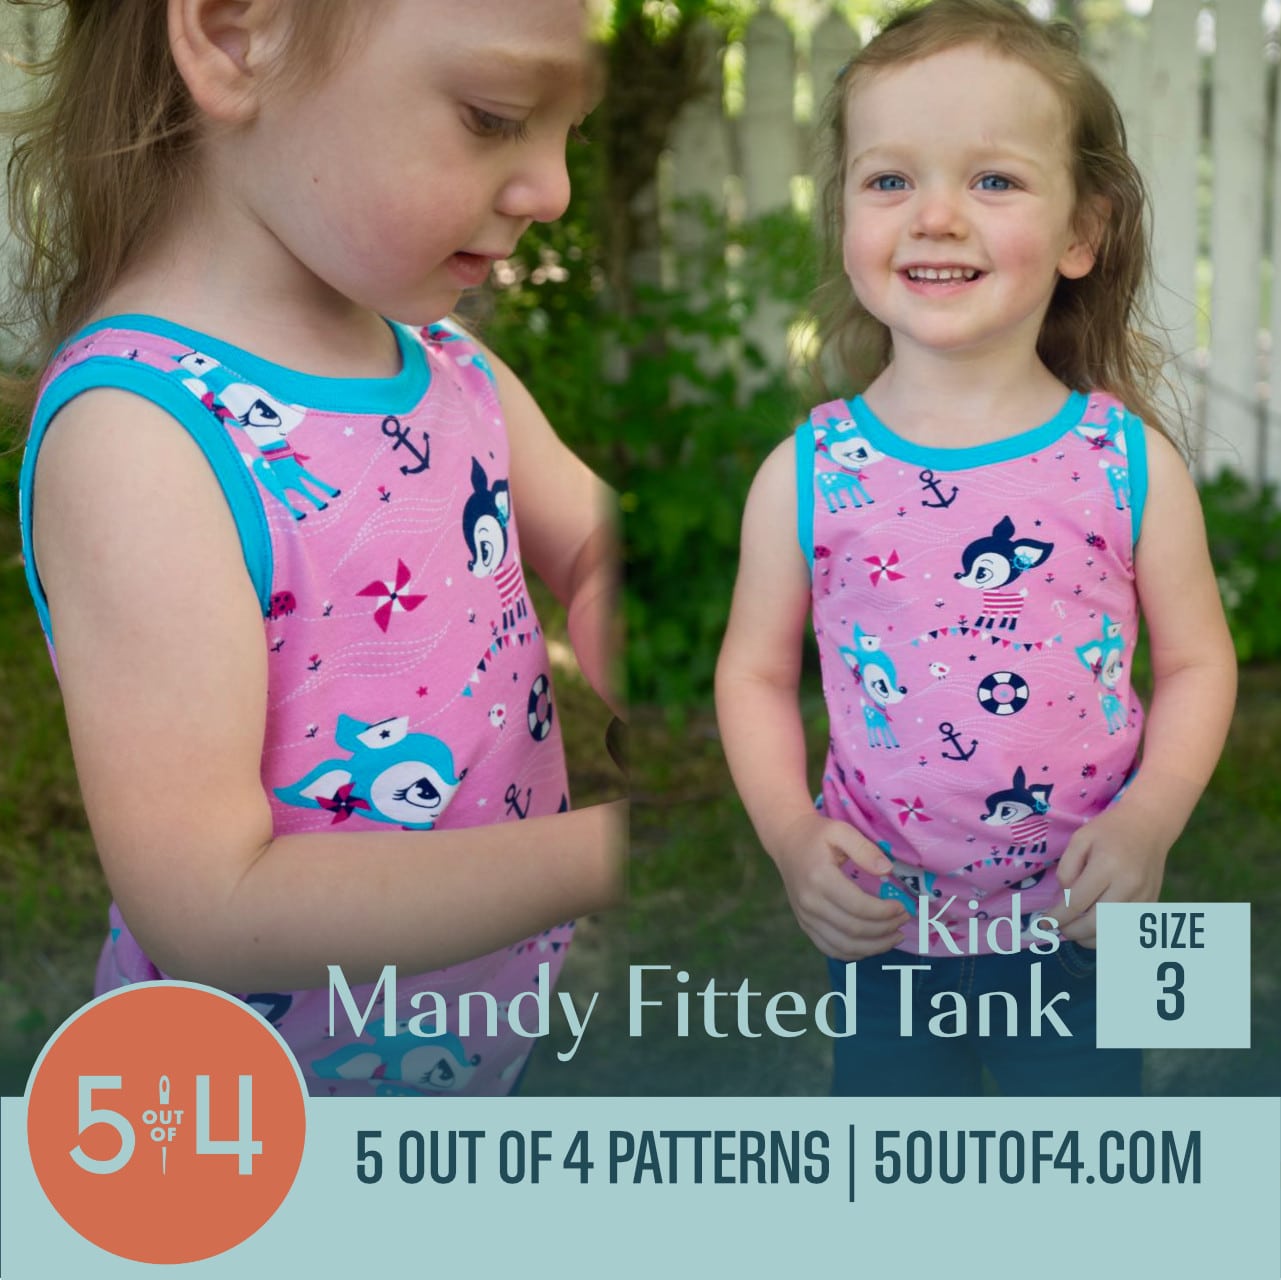 Kids' Mandy Fitted Tank - 5 out of 4 Patterns